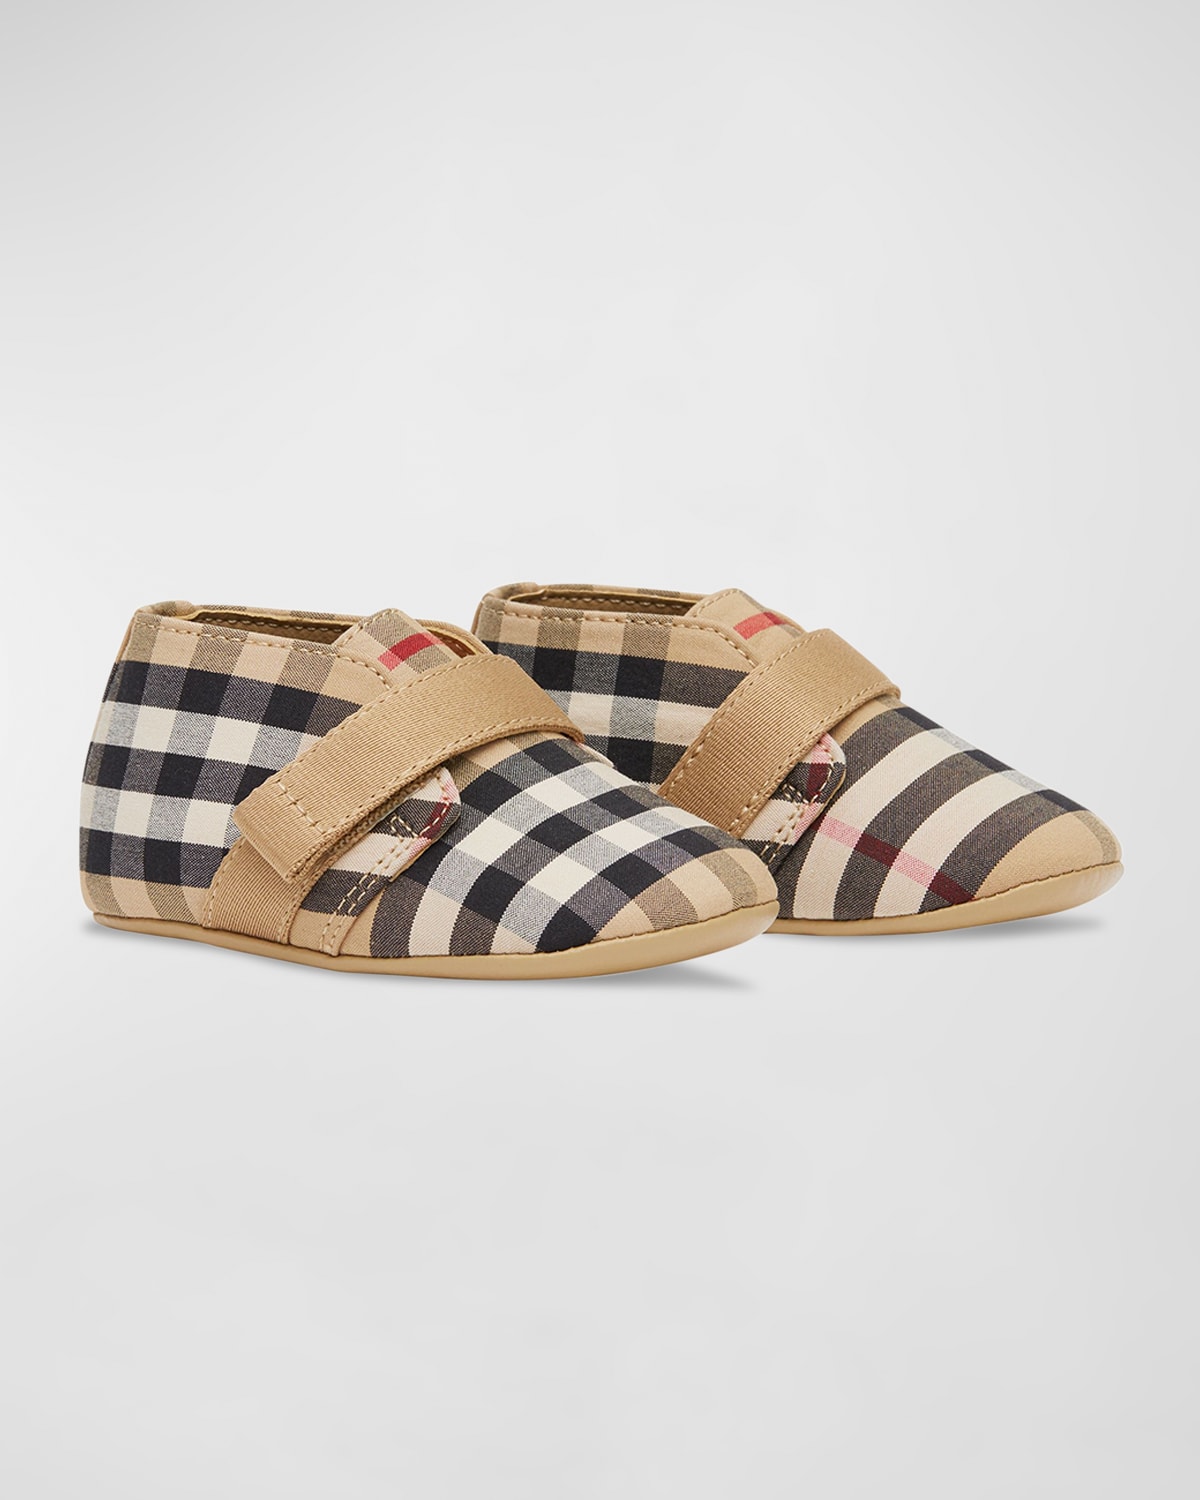 Baby Burberry Shoes | Neiman Marcus